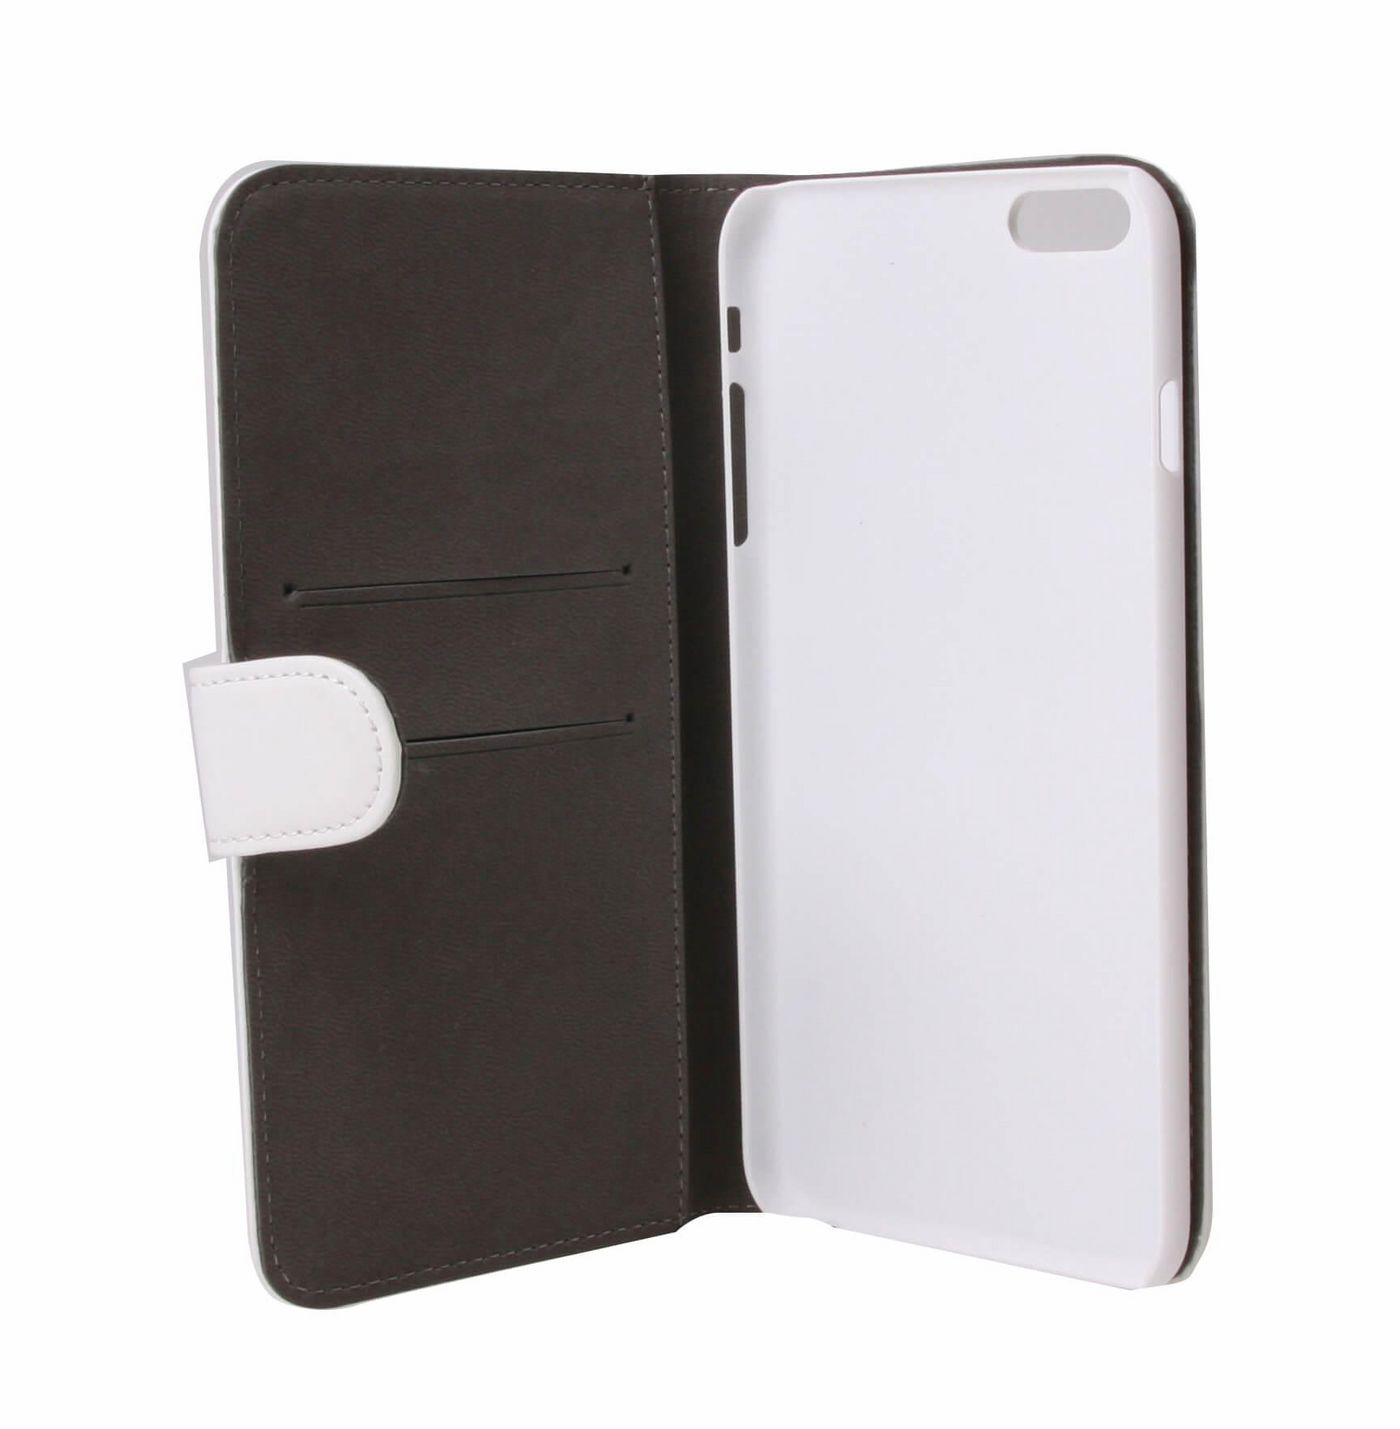 Gear 658850 iPhone 6 5,5 Wallet Wht Leth. 